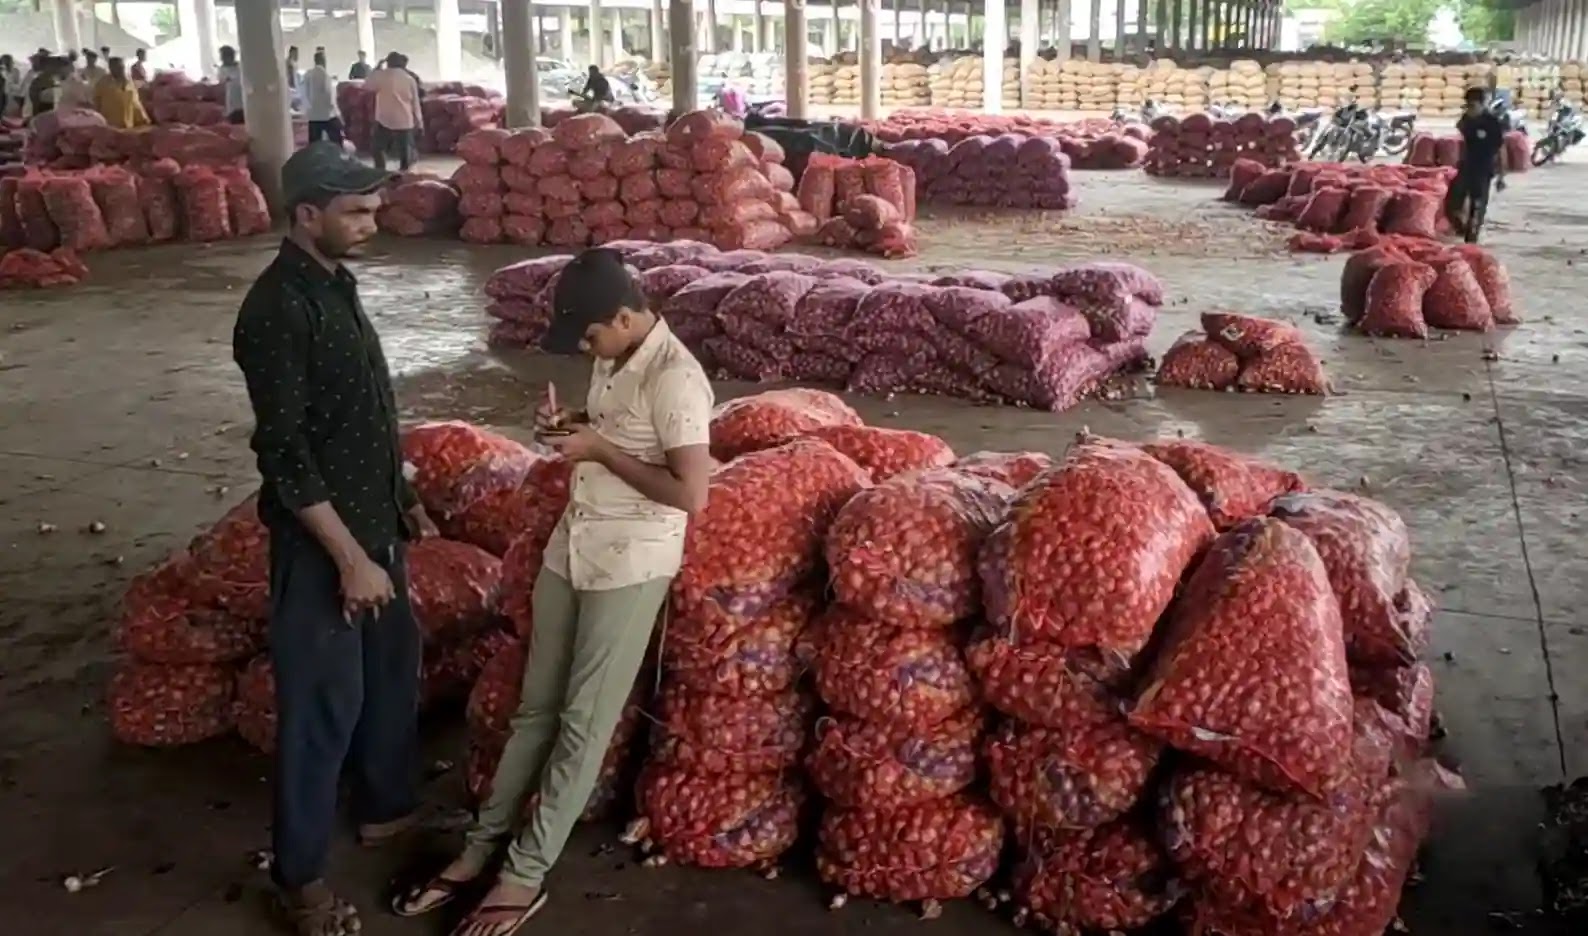 commodity bajar samachar of onion price today low will depend on the condition of the onion crop and new kanda income